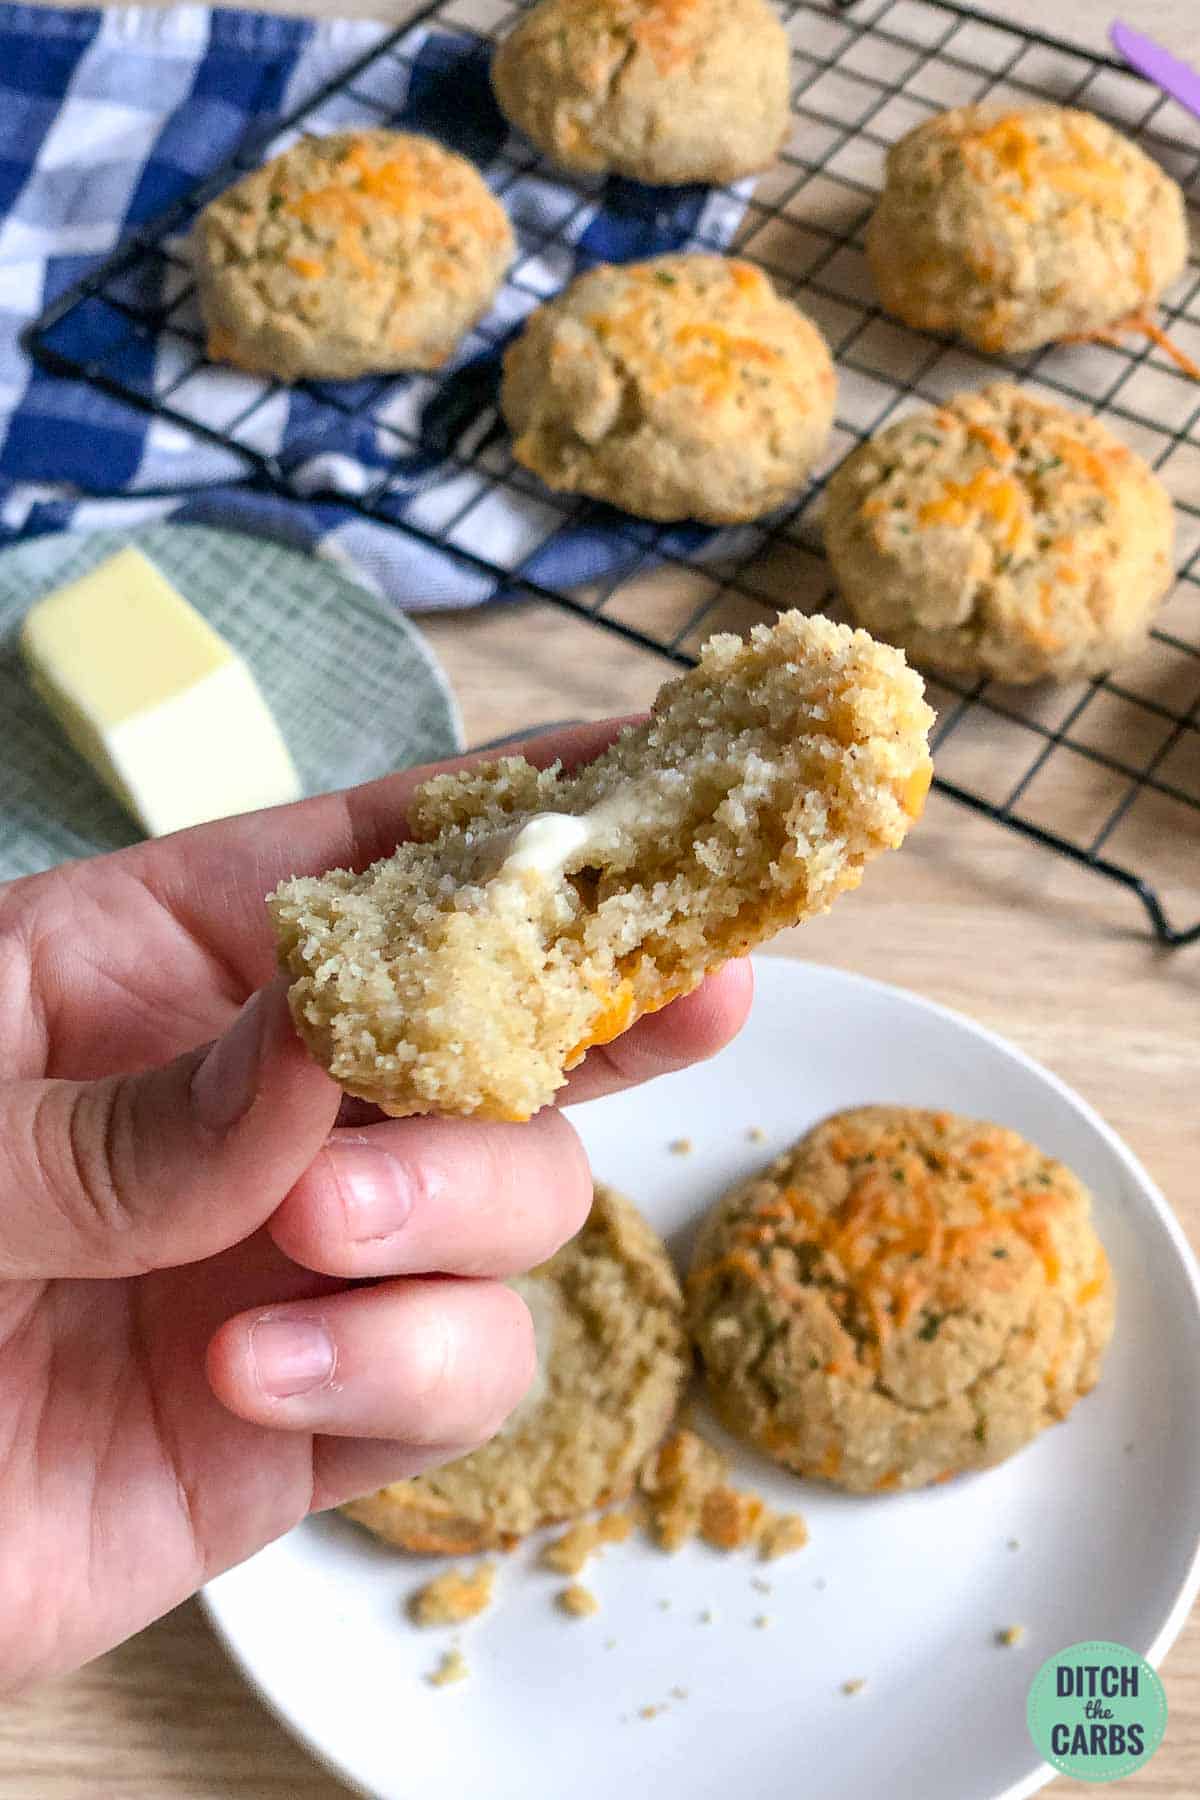 A hand lifting half a keto cheddar biscuit (scone) with a bite taken out of it.